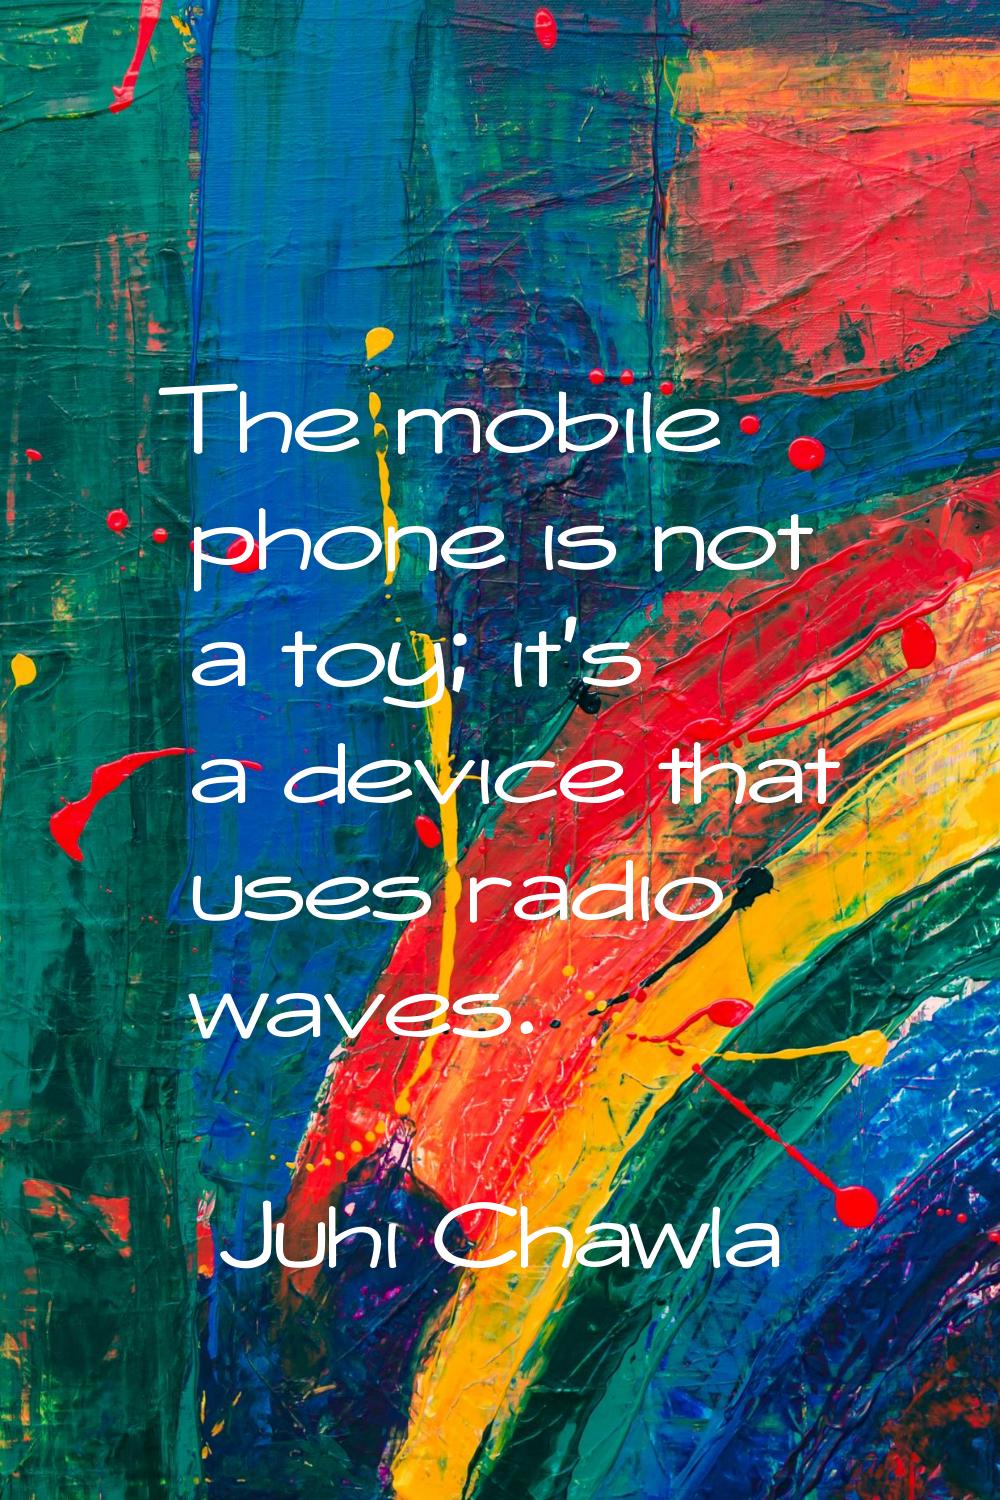 The mobile phone is not a toy; it's a device that uses radio waves.